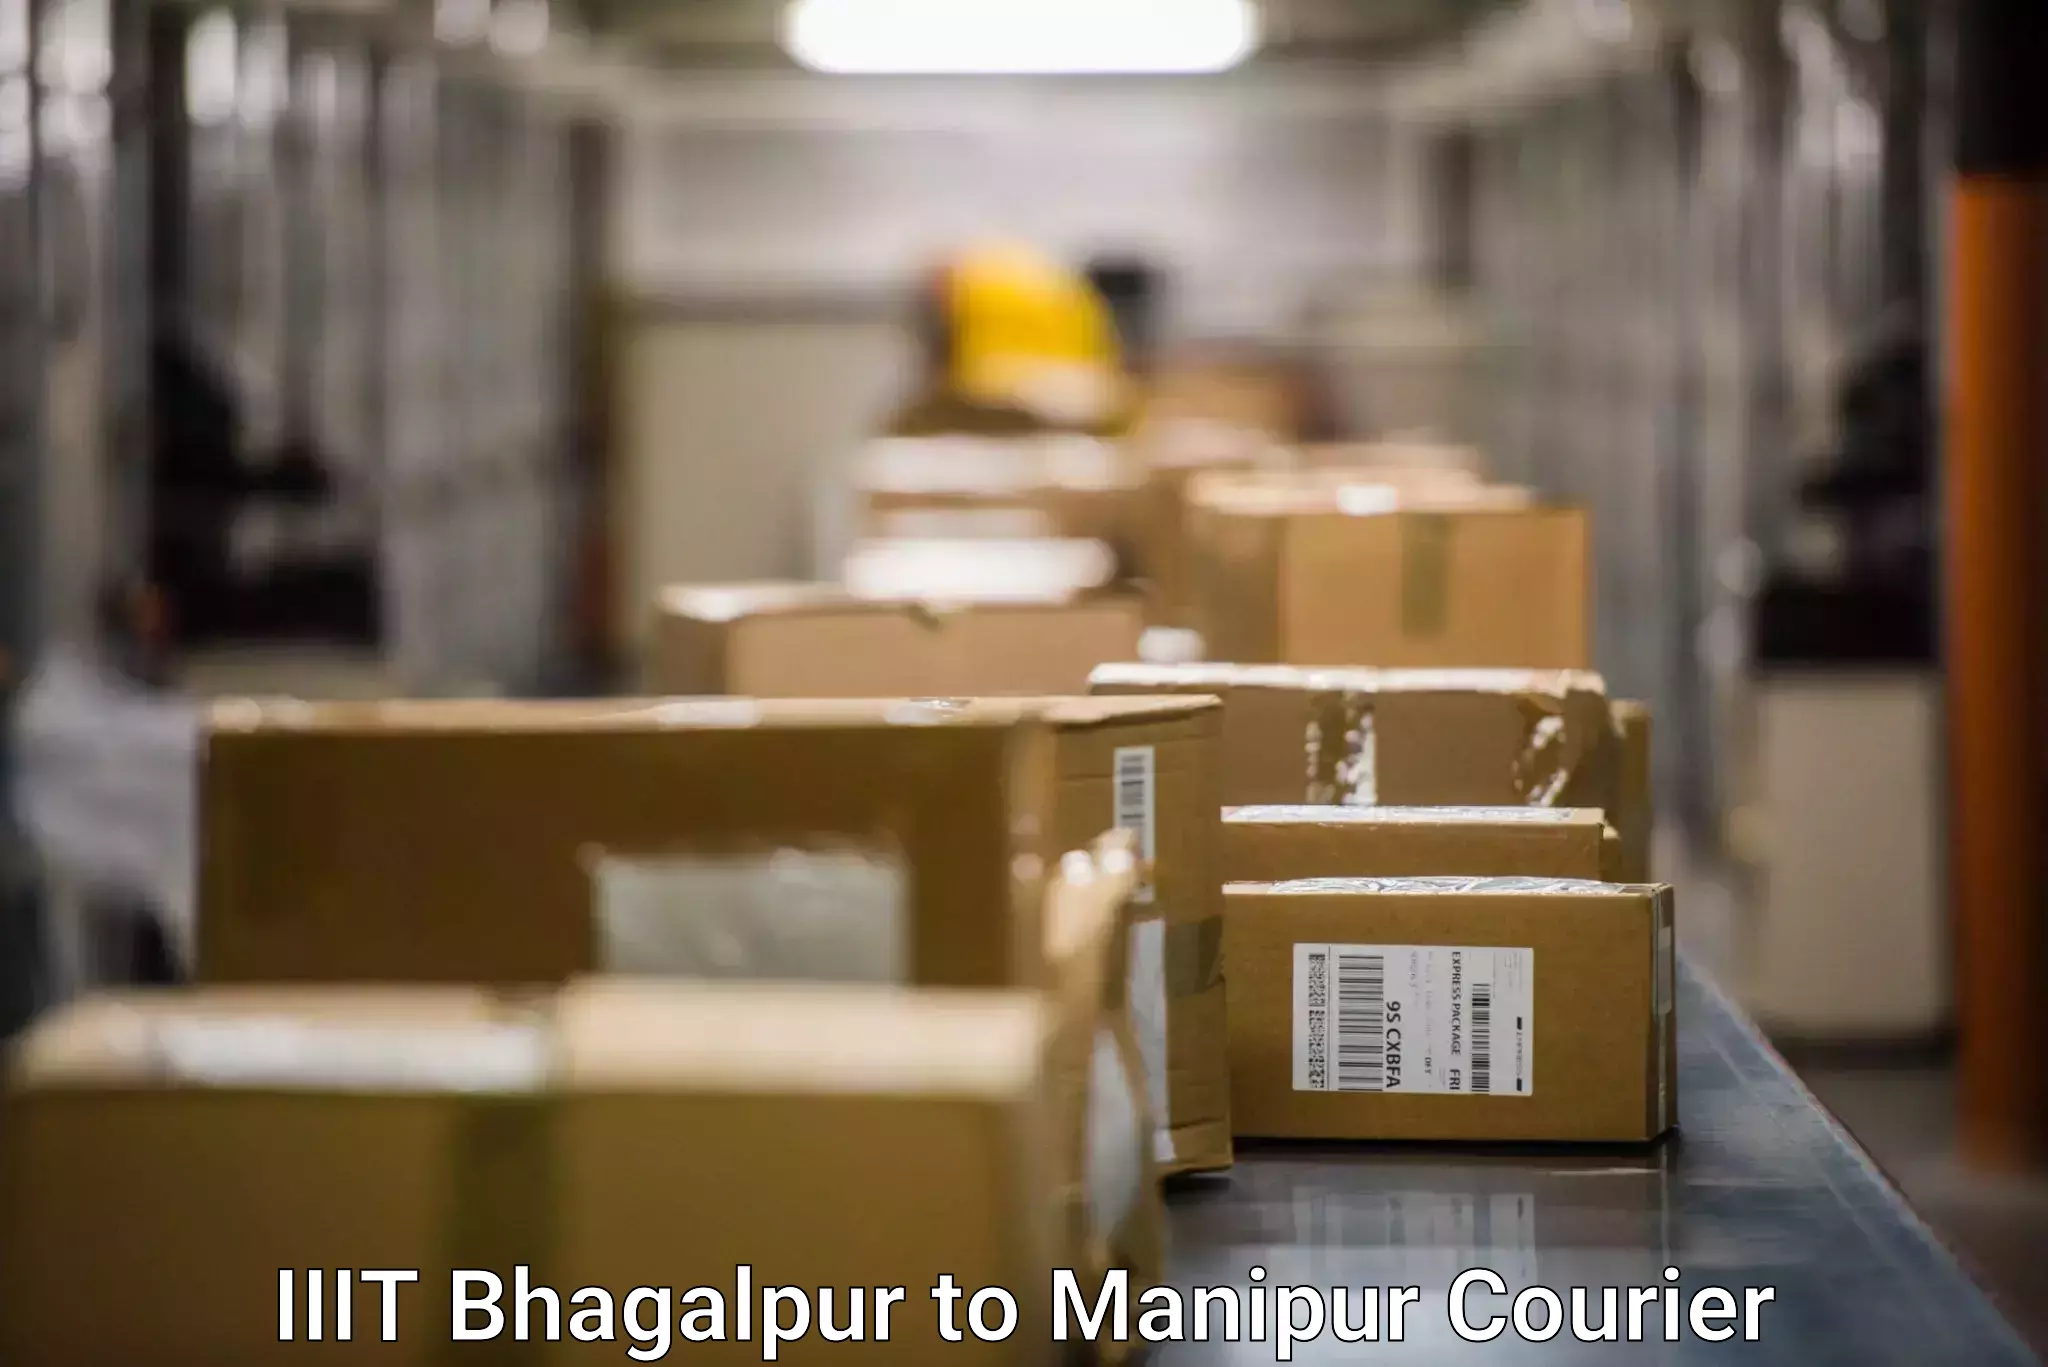 Global courier networks IIIT Bhagalpur to Imphal